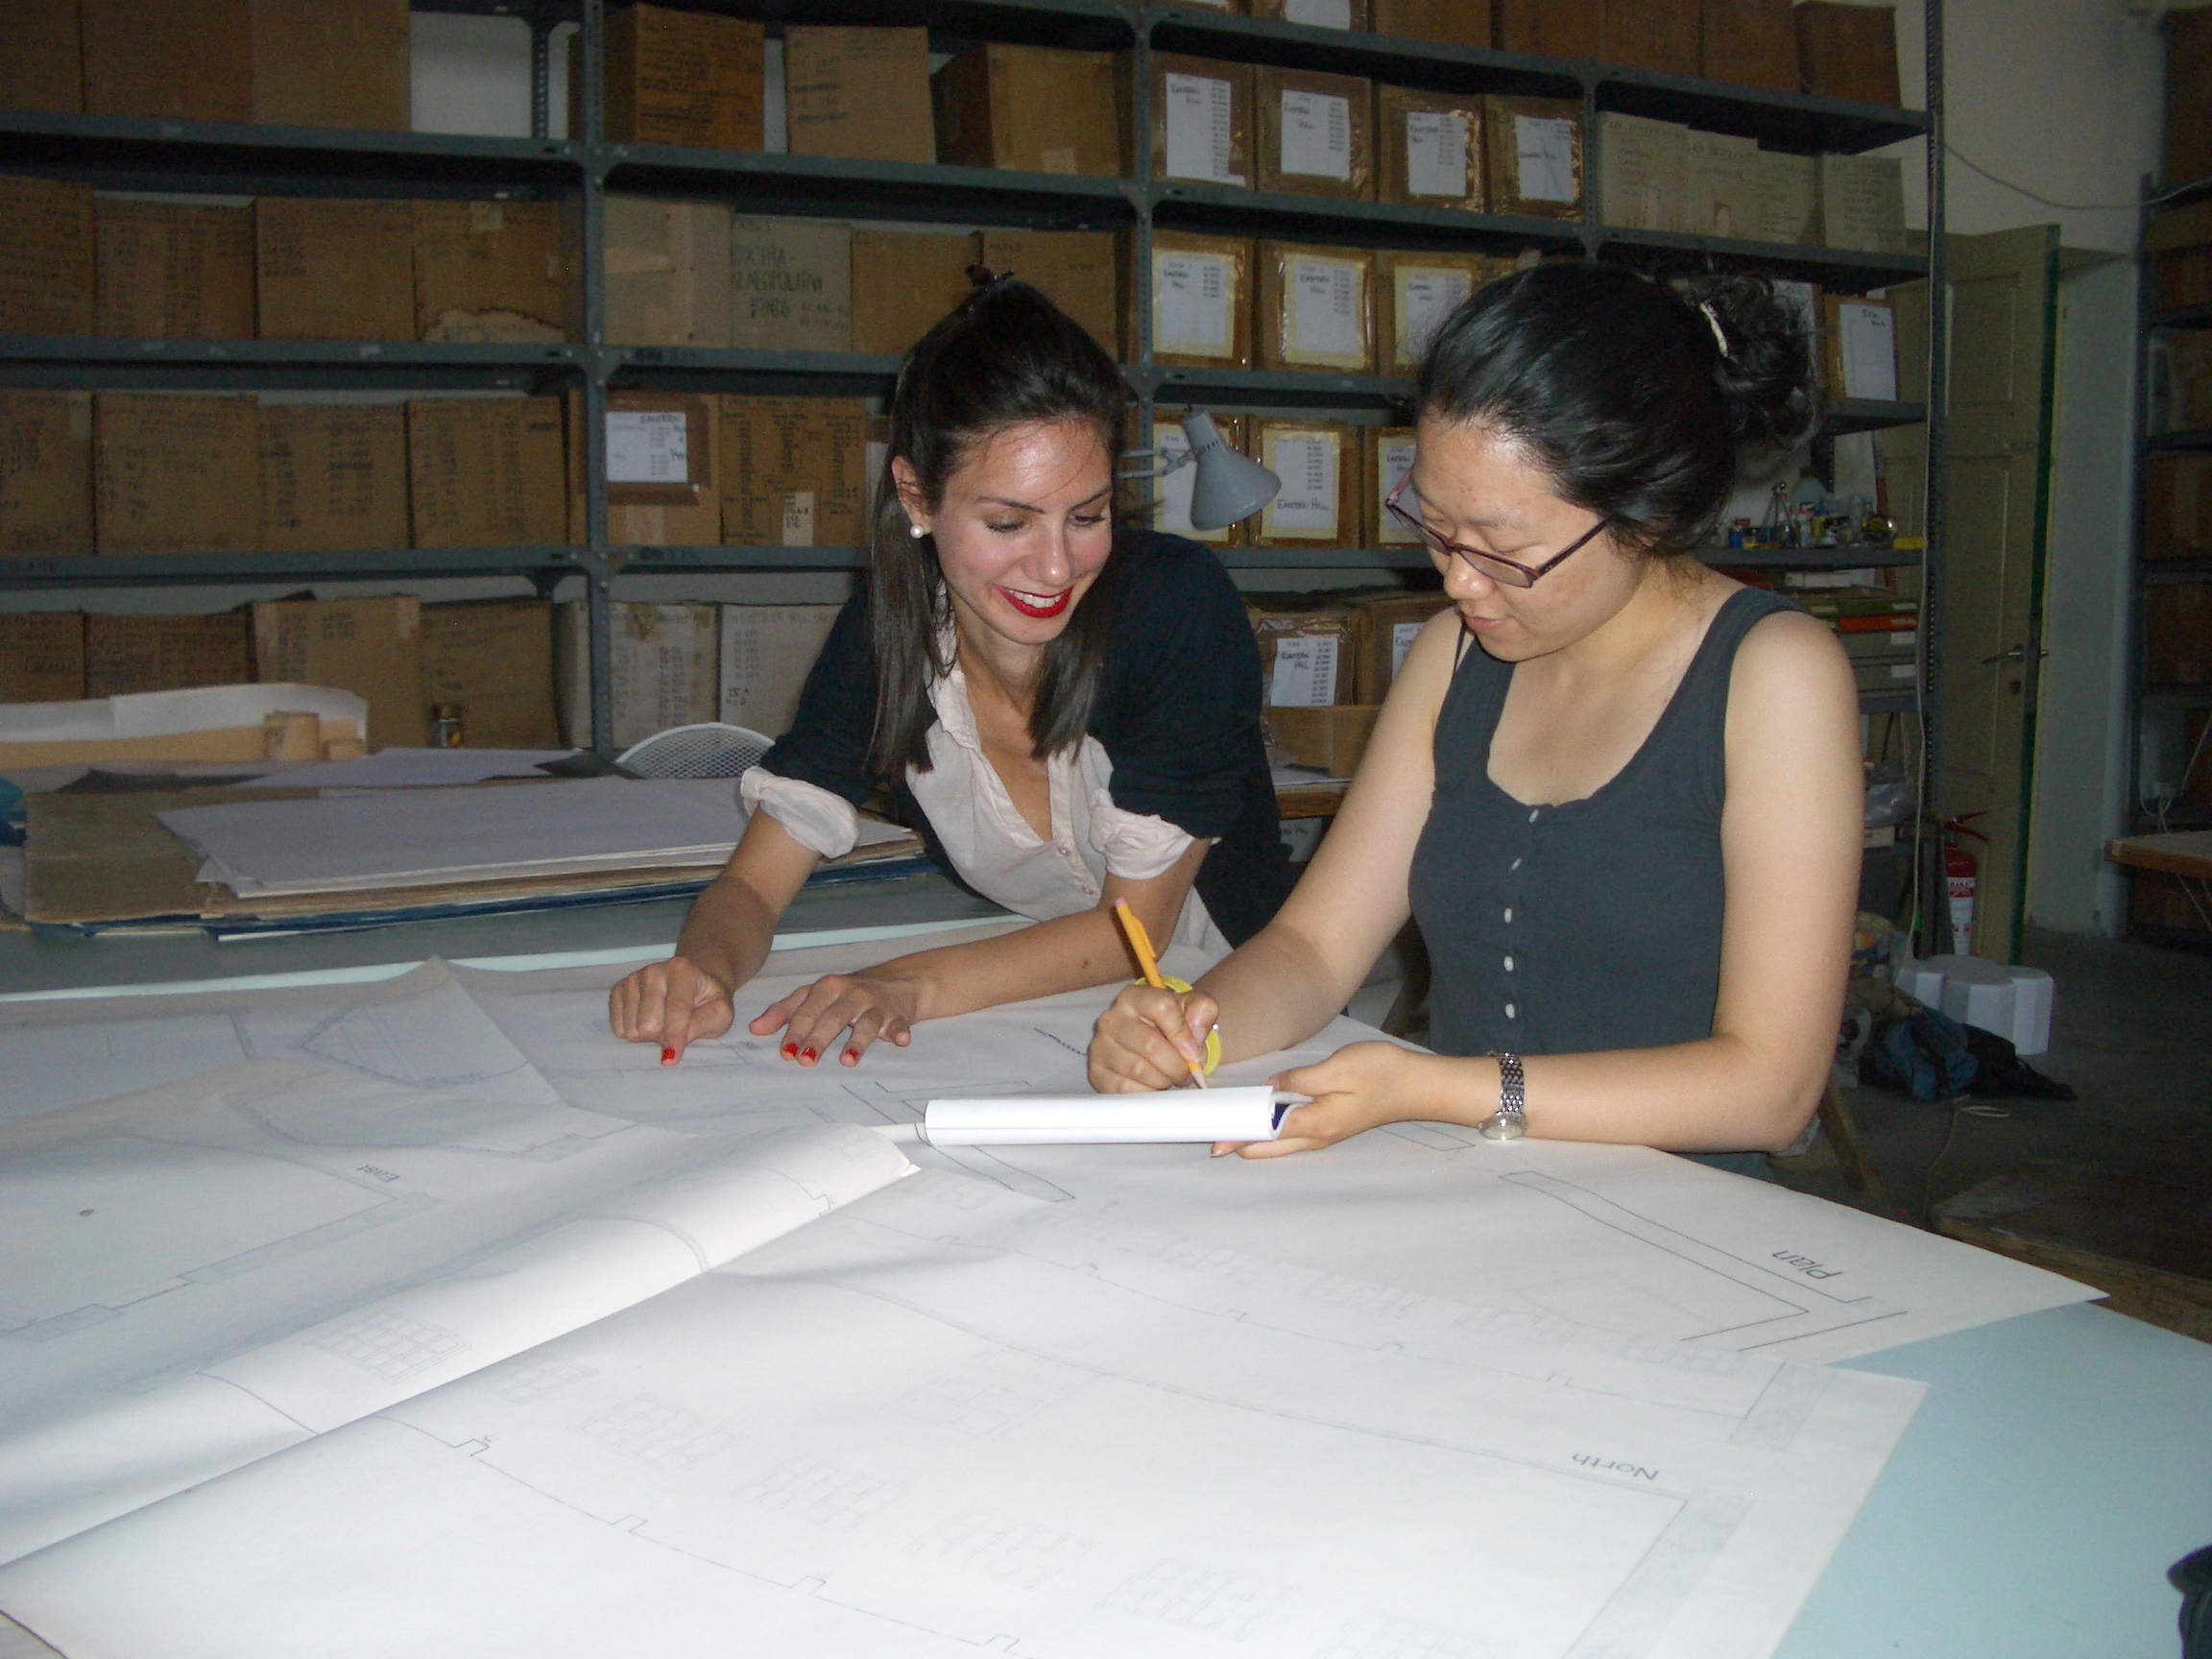 Gloria and I inspect architectural drawings